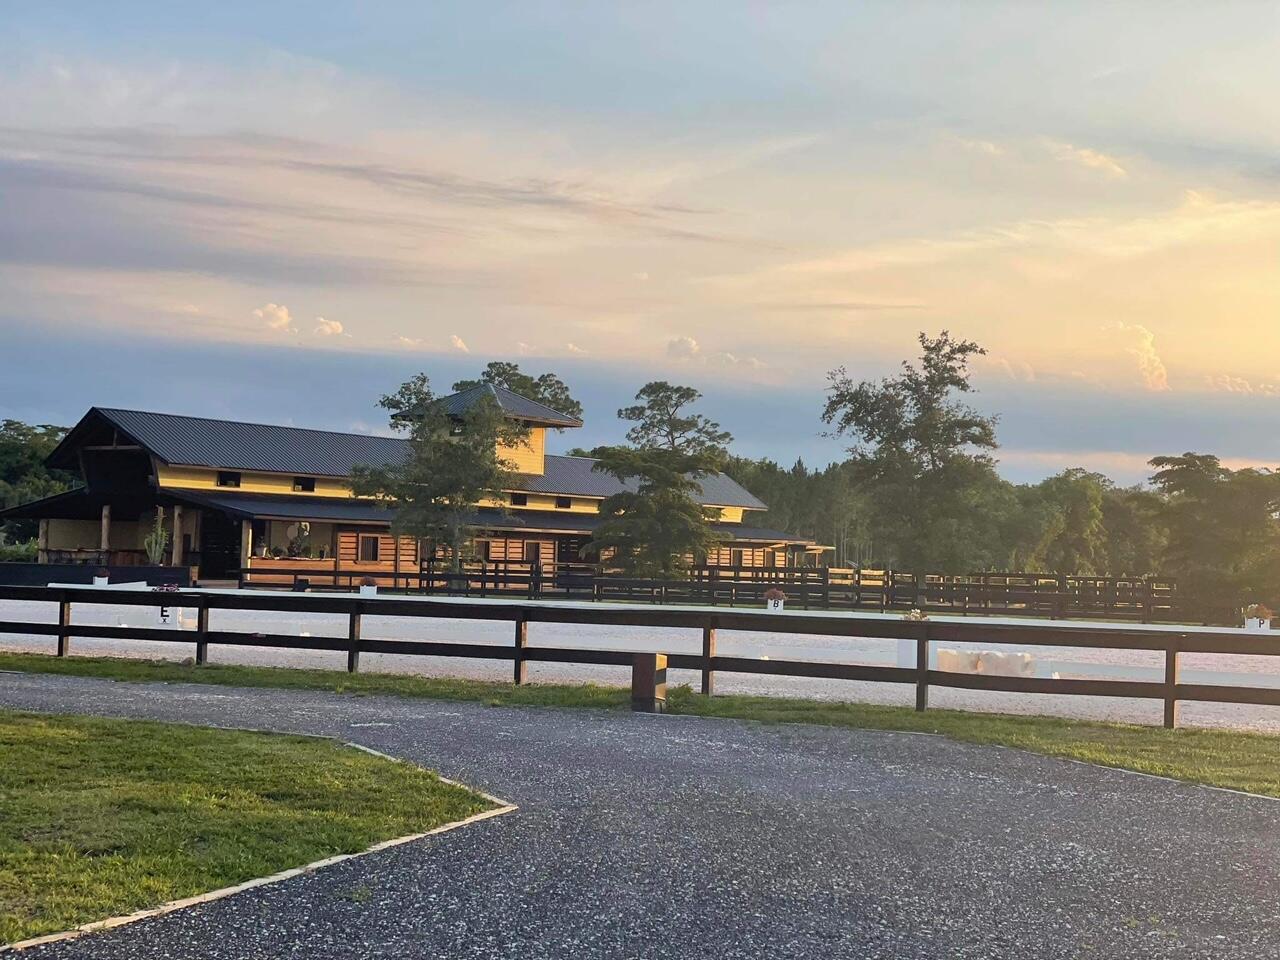 3 Barns =27 Annual and/or Seasonal Stalls available May 30, 2024.  5 acres on paved road close to TSC and many conveniences.  Located across the street from maintained equestrian trails. ~Barn # 1: 13 - 12x12 stalls with  paddocks in a luxury barn with amenities including H/C wash stalls and R/O water. Viewing deck with kitchenette overlooking  100'x250' all weather irrigated arena, 100' mirror wall and sound system.  ~Barn # 2:  4 - 16x16 stalls with automatic waterers/feeders & runouts in CBS barn with rubber paver aisle. Kitchenette/lounge over looking the arena. Tack room, laundry, H/C wash stall, fly system.  ~Barn # 3: 10 - 12x12 wood stalls in a clear span tent barn with wash stalls. WiFi, ADT Security System with cameras, All measurements are approx and subject to error